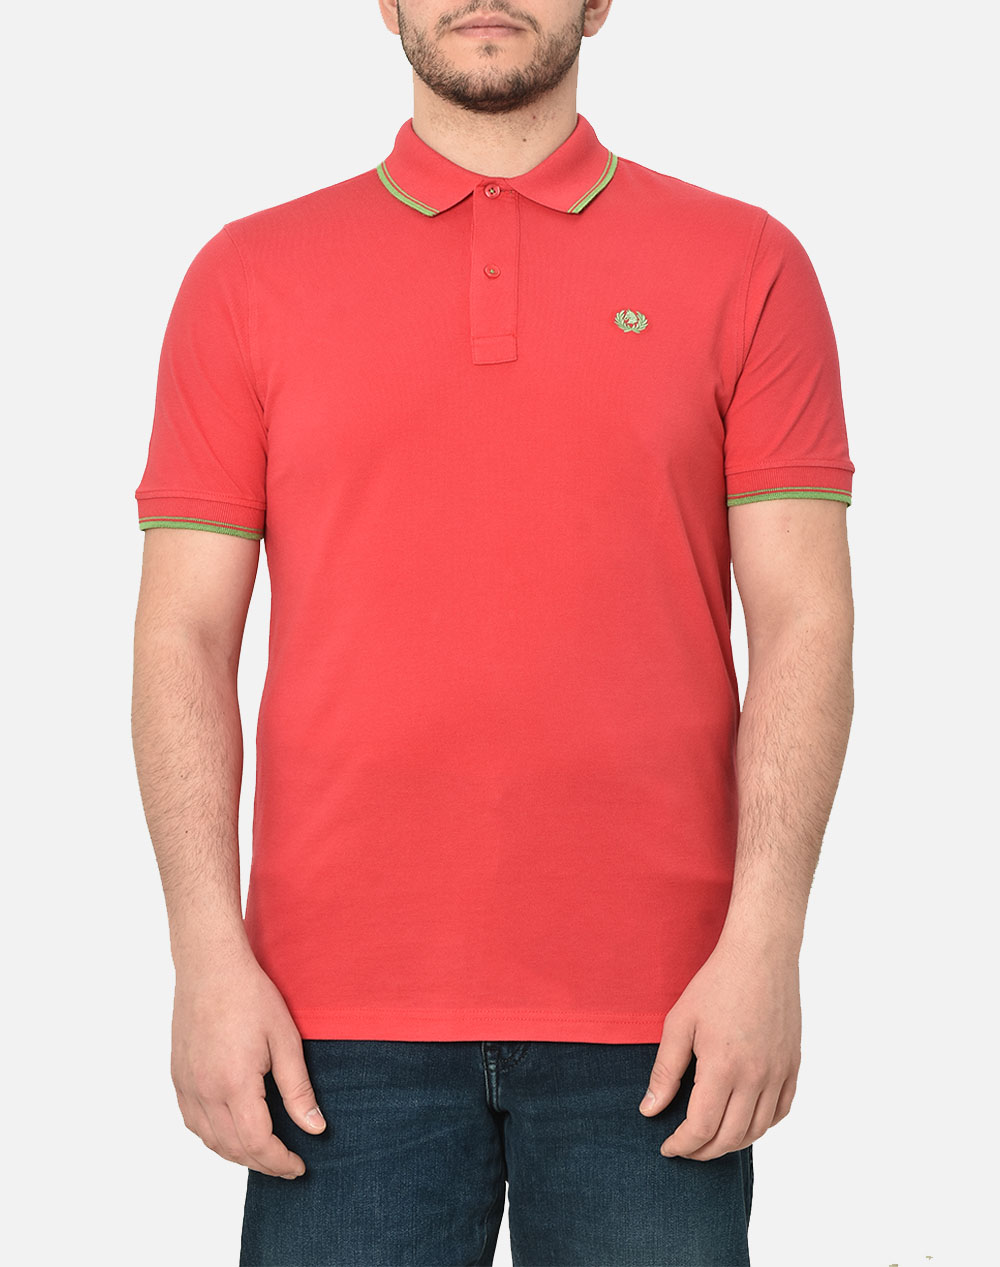 ASCOT POLO 15588360-23 Red 3620AASCO3410066_9139